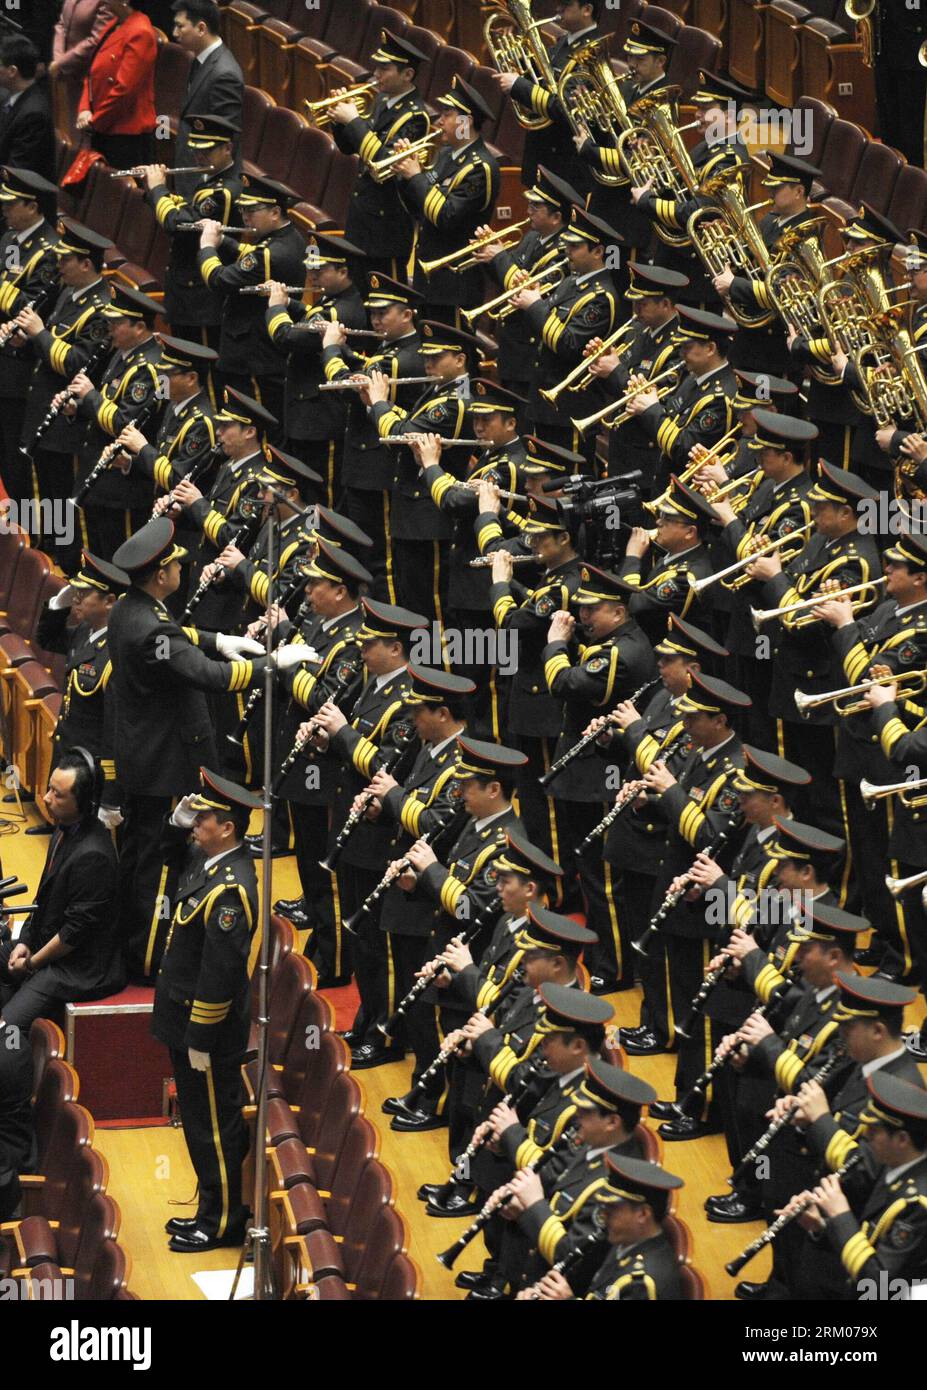 Bildnummer: 59337805  Datum: 11.03.2013  Copyright: imago/Xinhua The military band of China s People s Liberation Army plays the national anthem at the closing meeting of the first session of the 12th National Committee of the Chinese People s Political Consultative Conference (CPPCC) at the Great Hall of the in Beijing, capital of China. (Xinhua/Qin Qing) (hdt) (TWO SESSIONS)CHINA-BEIJING-CPPCC-CLOSING MEETING (CN) PUBLICATIONxNOTxINxCHN Politik Nationaler Volkskongress Politische Konsultativkonferenz x2x xac 2013 hoch o0 Militär Militärmusik Musik Orchester     59337805 Date 11 03 2013 Copyr Stock Photo